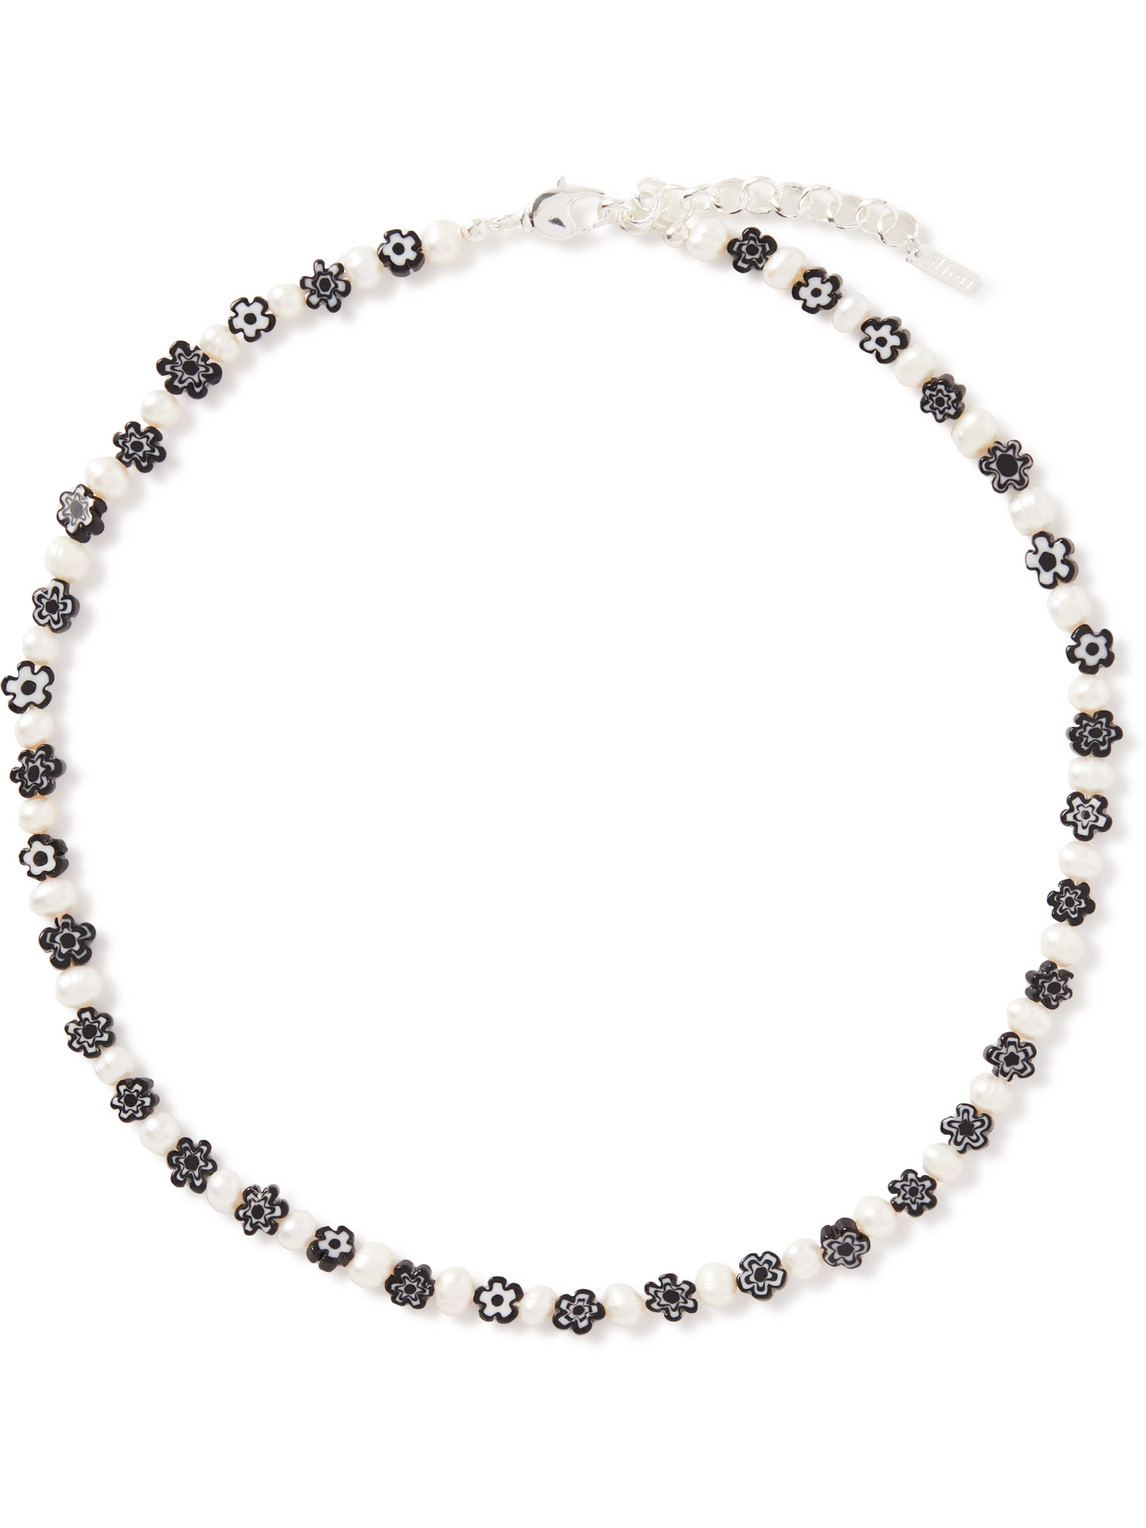 Eliou Jengo Silver, Pearl And Glass Beaded Necklace In Black